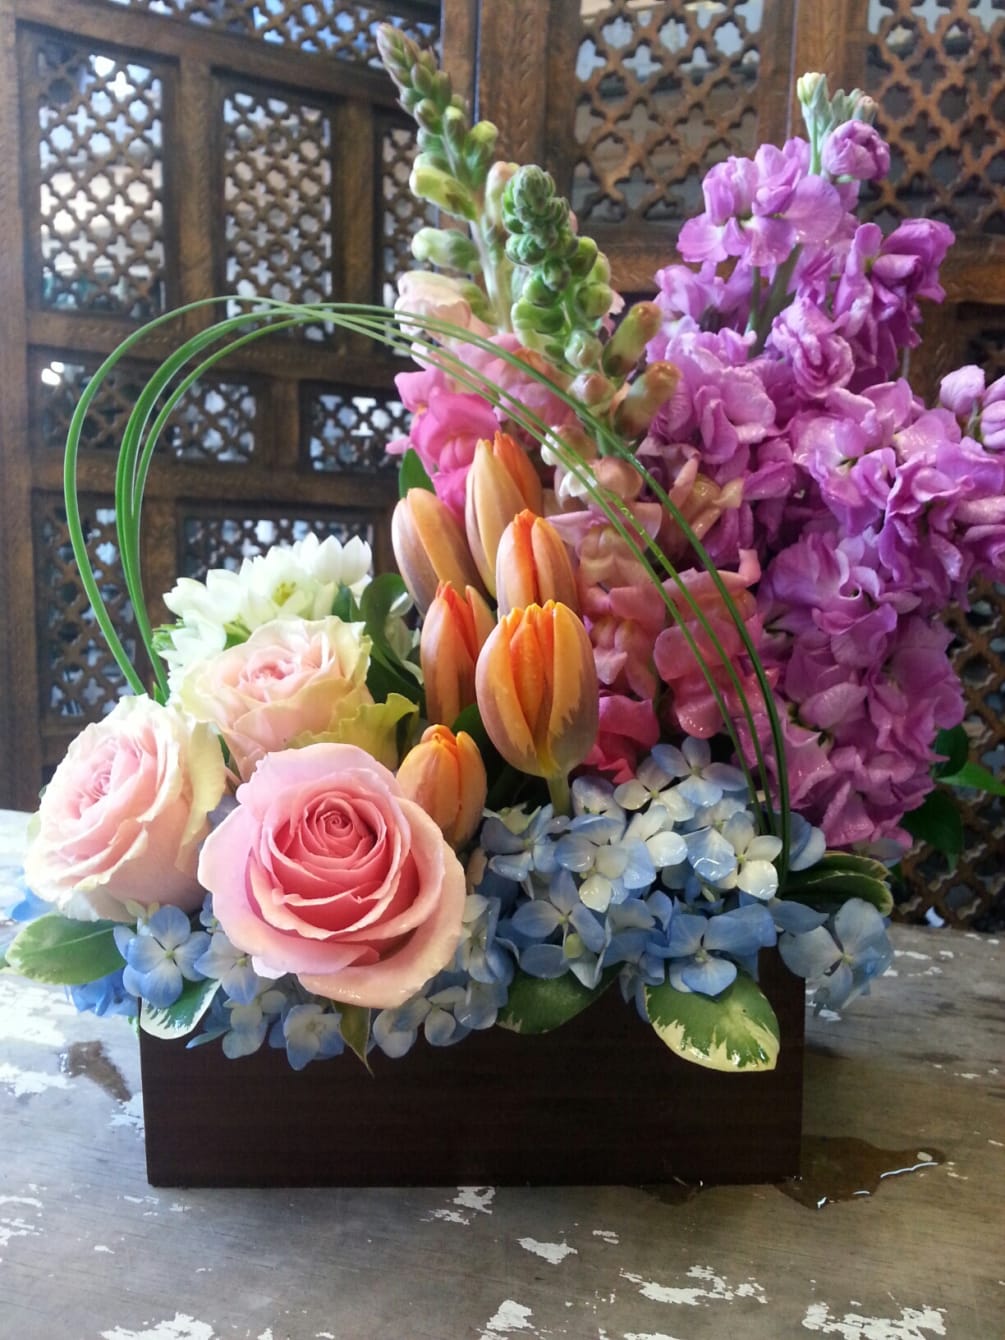 Wonderful mix of flowers based with hydrangea and a bit of whimsical